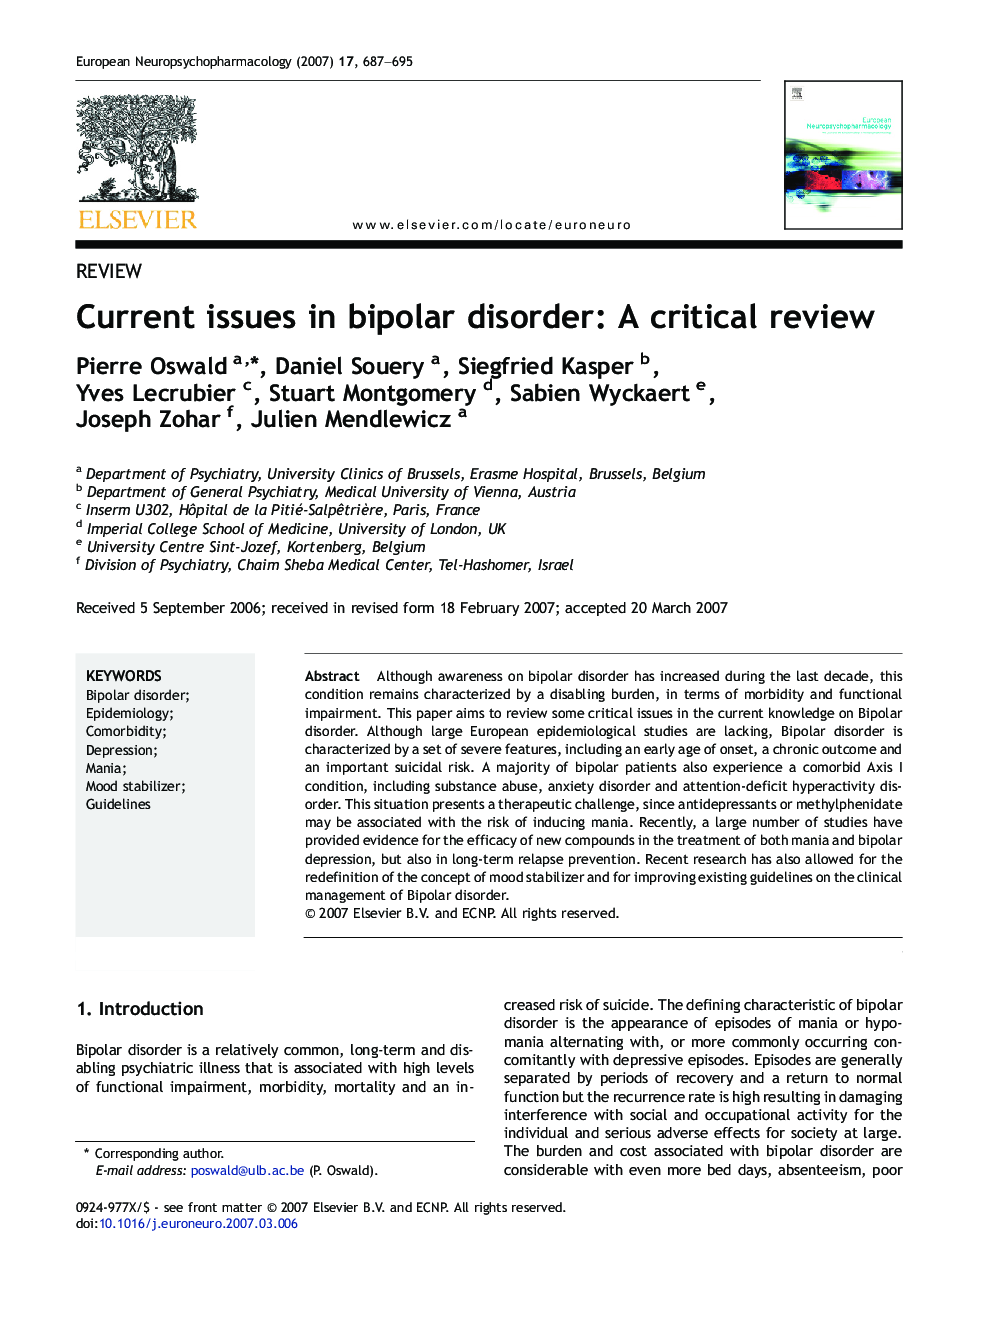 Current issues in bipolar disorder: A critical review